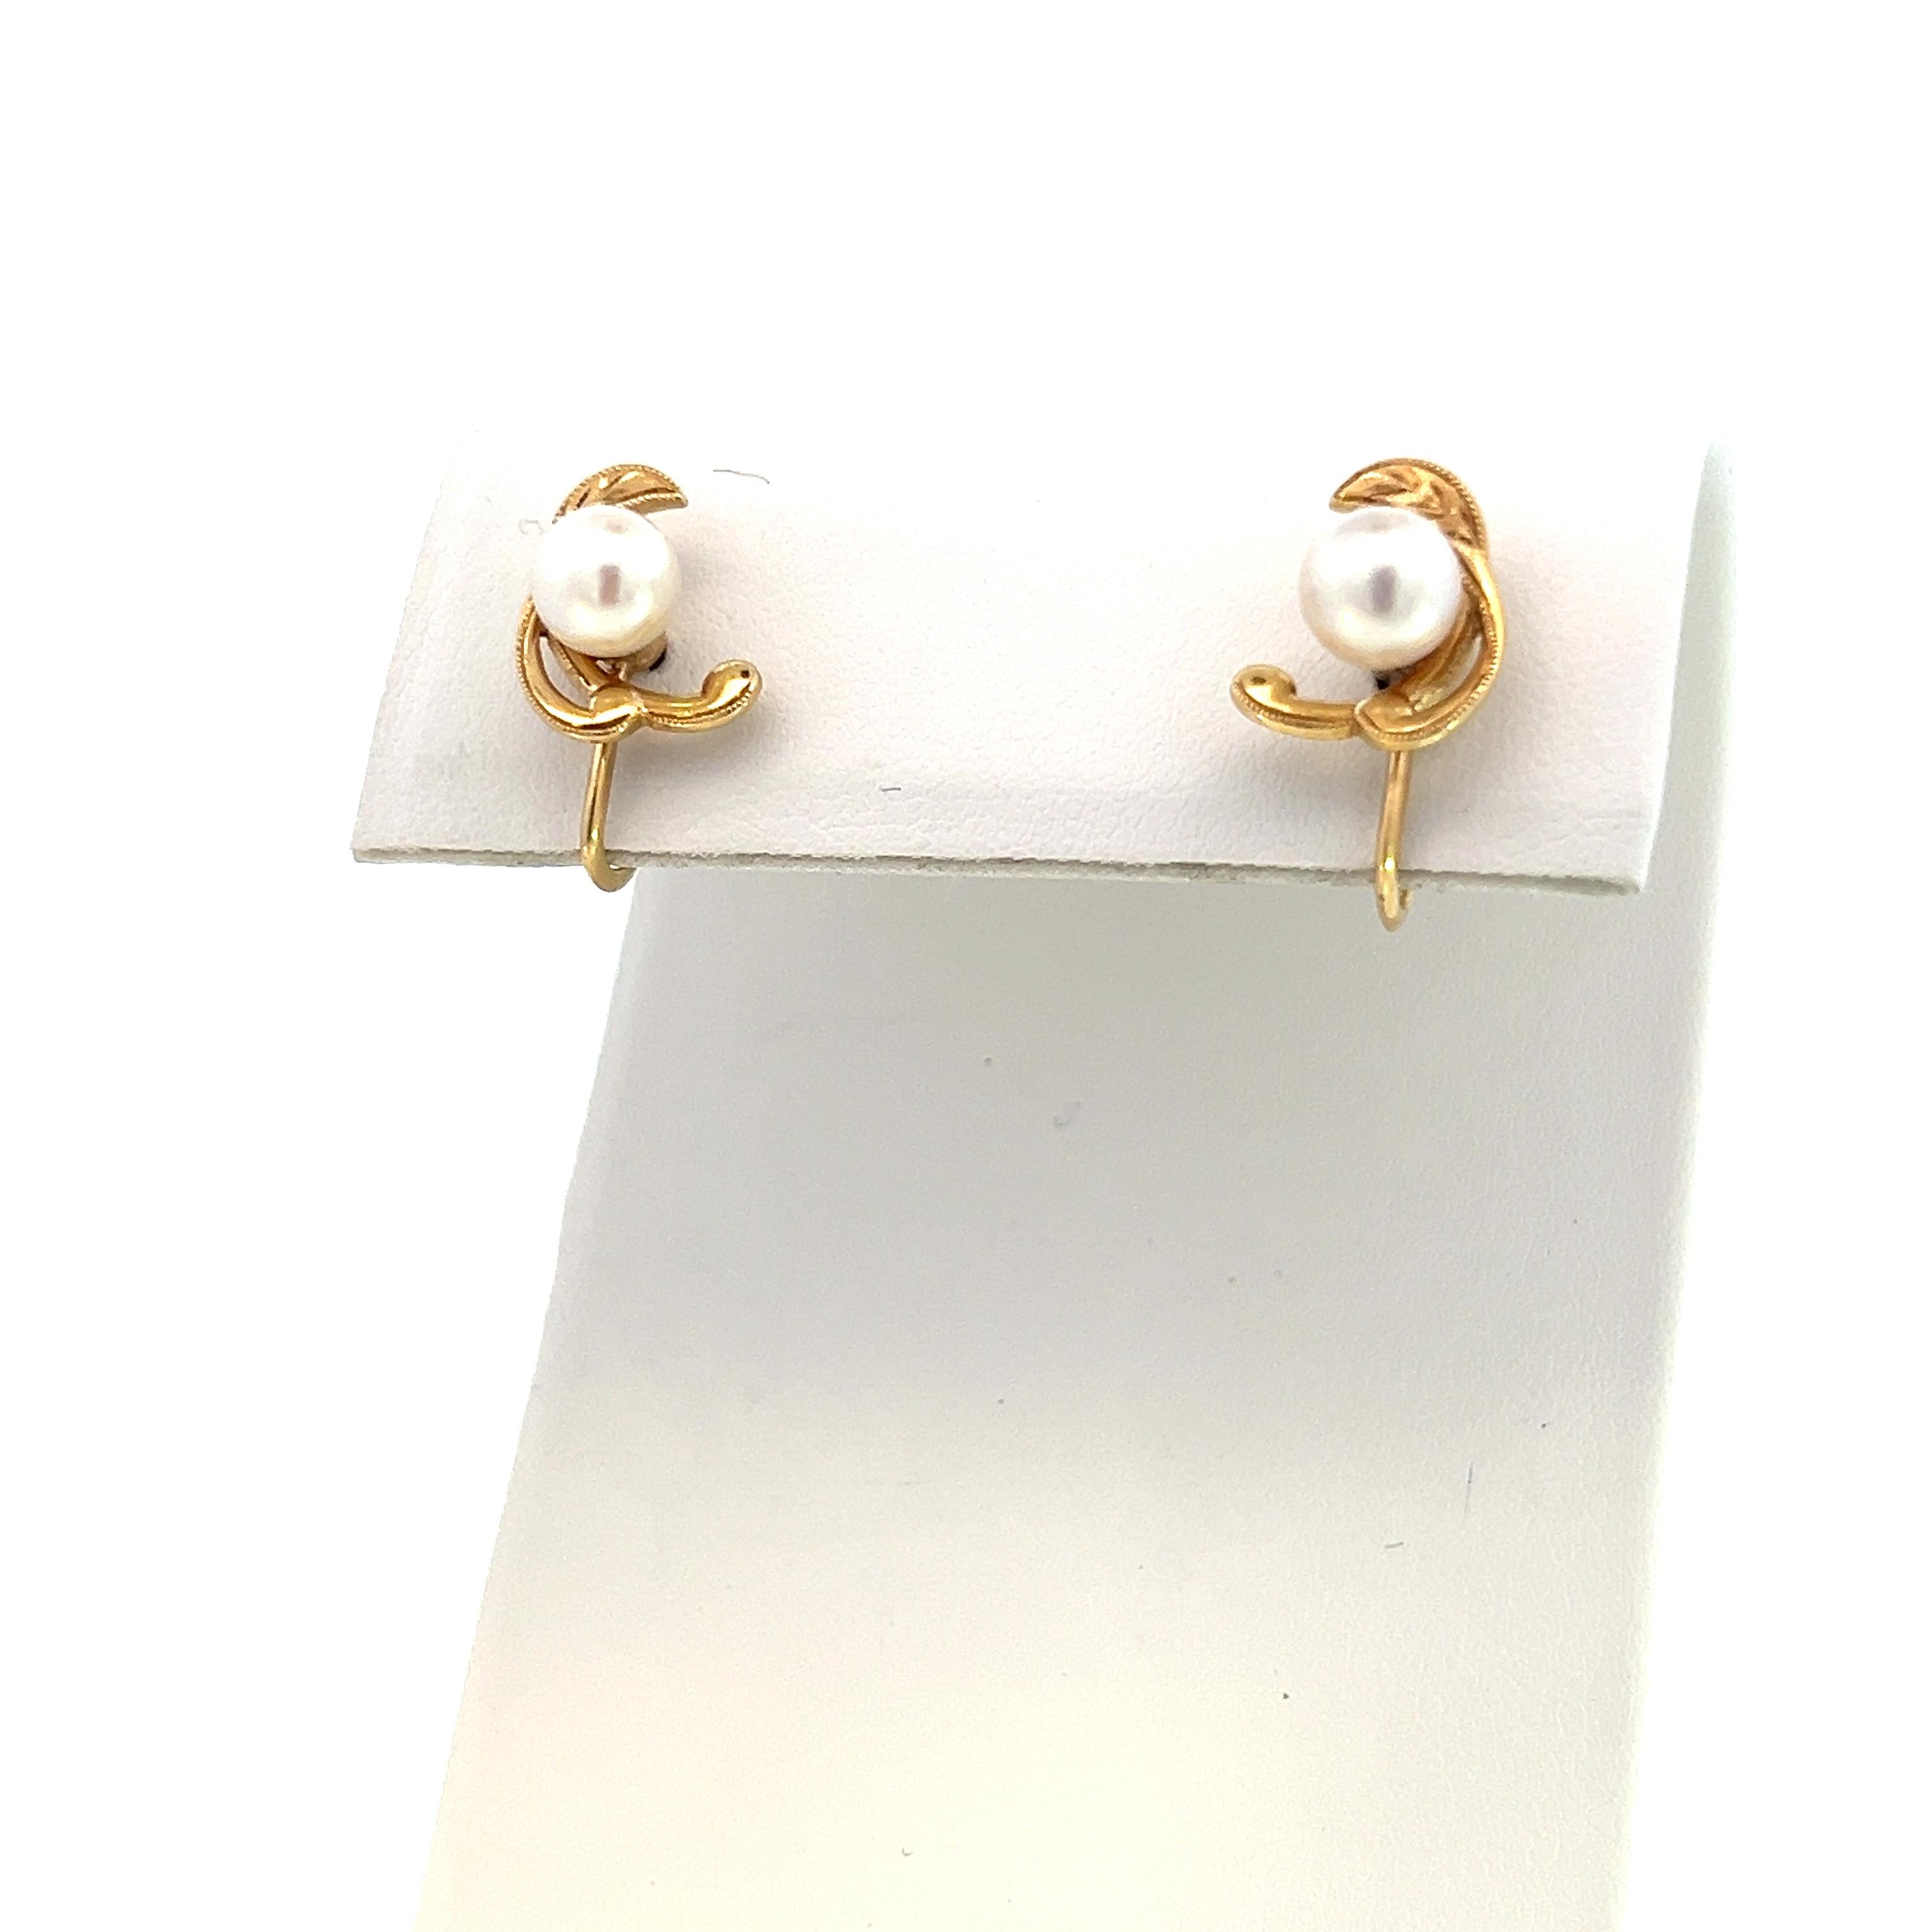 Mikimoto Estate Akoya Pearl Earrings 14k YG 6 mm 3.4 Grams In Good Condition For Sale In Brooklyn, NY